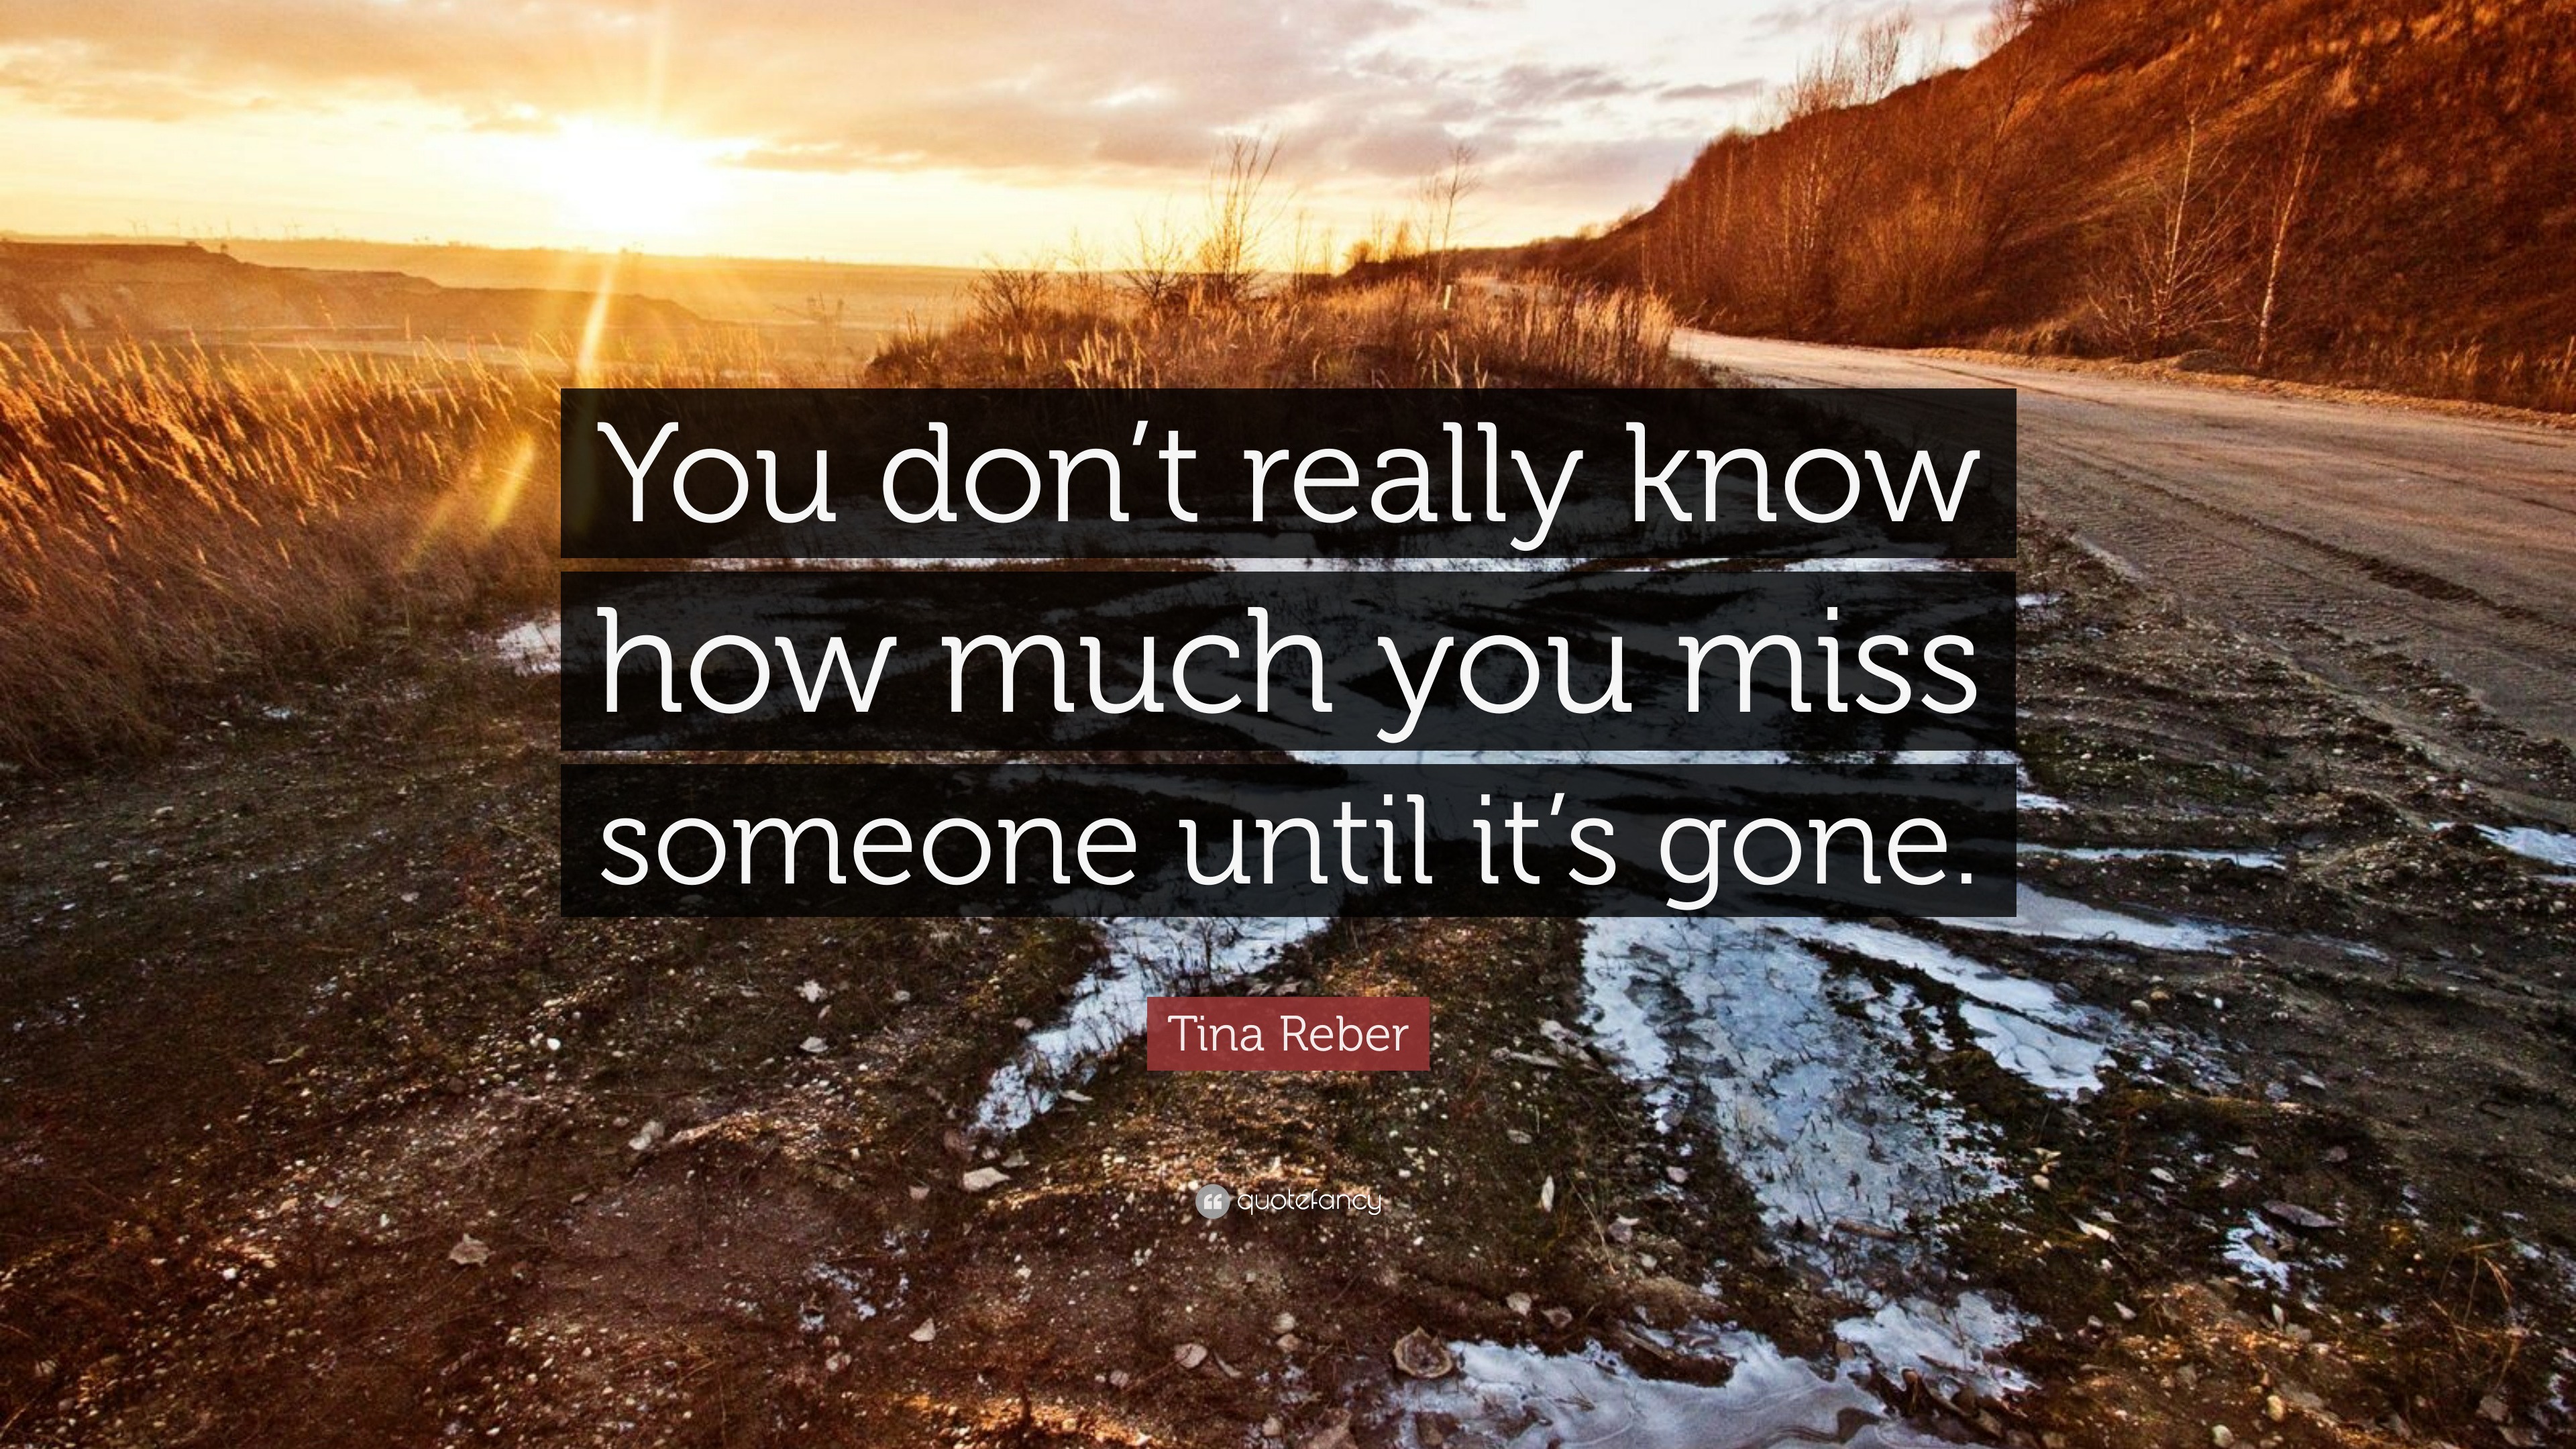 Tina Reber Quote “You don t really know how much you miss someone